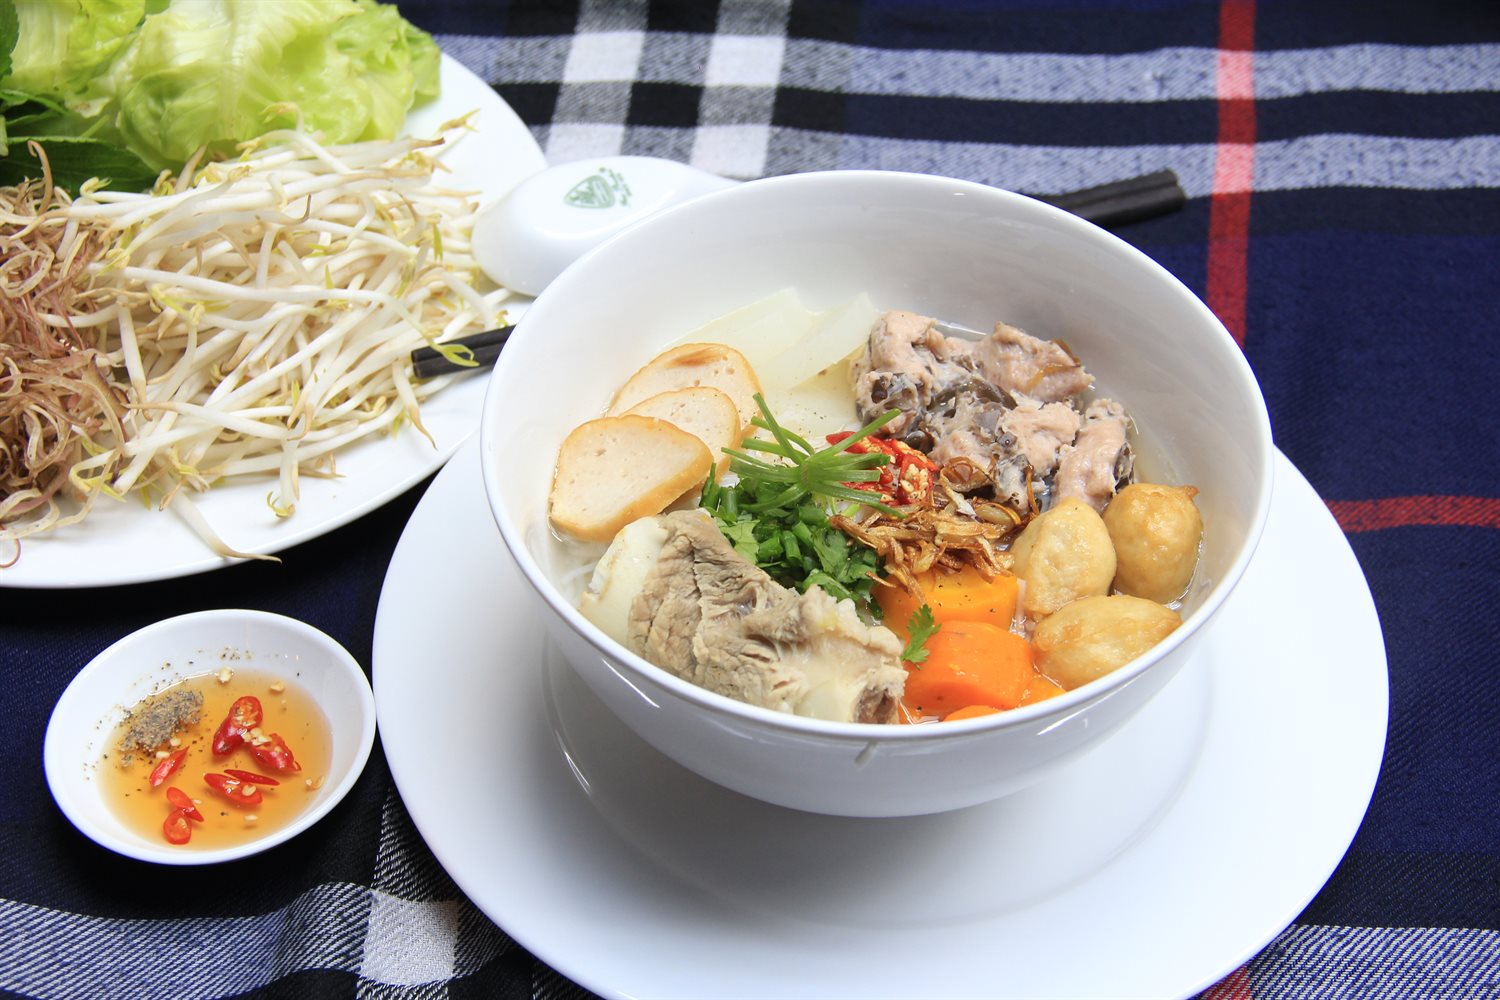 Must-eat dishes in HCMC-Saigon / Where to try?